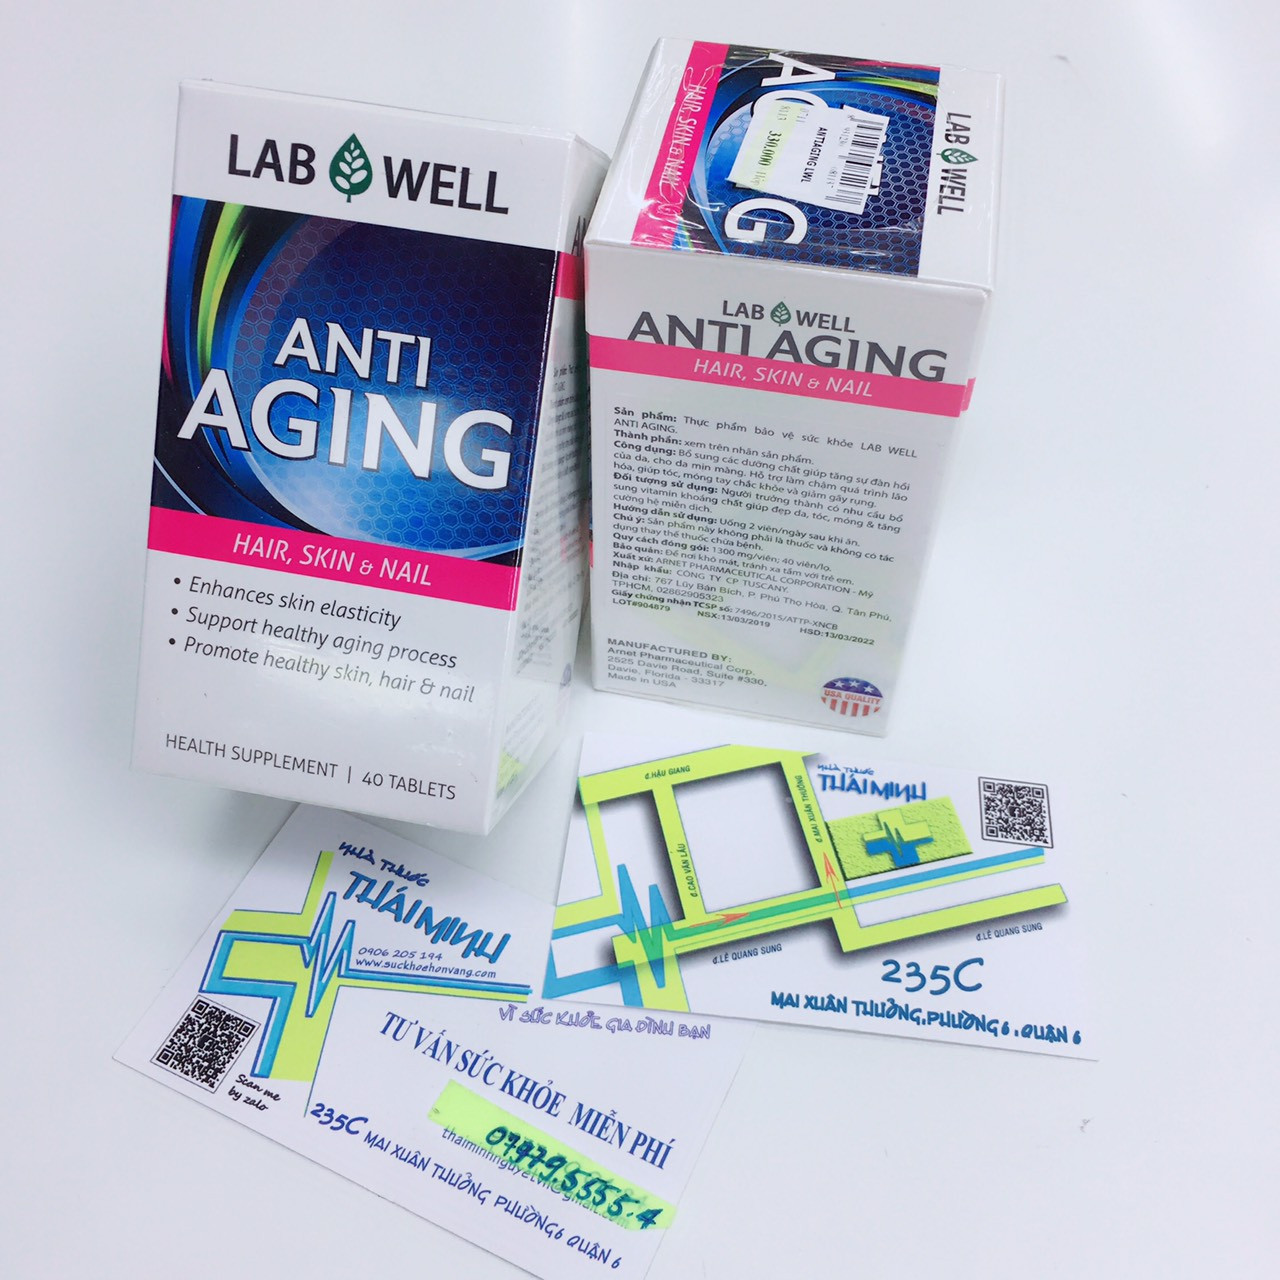 ANTI AGING LAB WELL